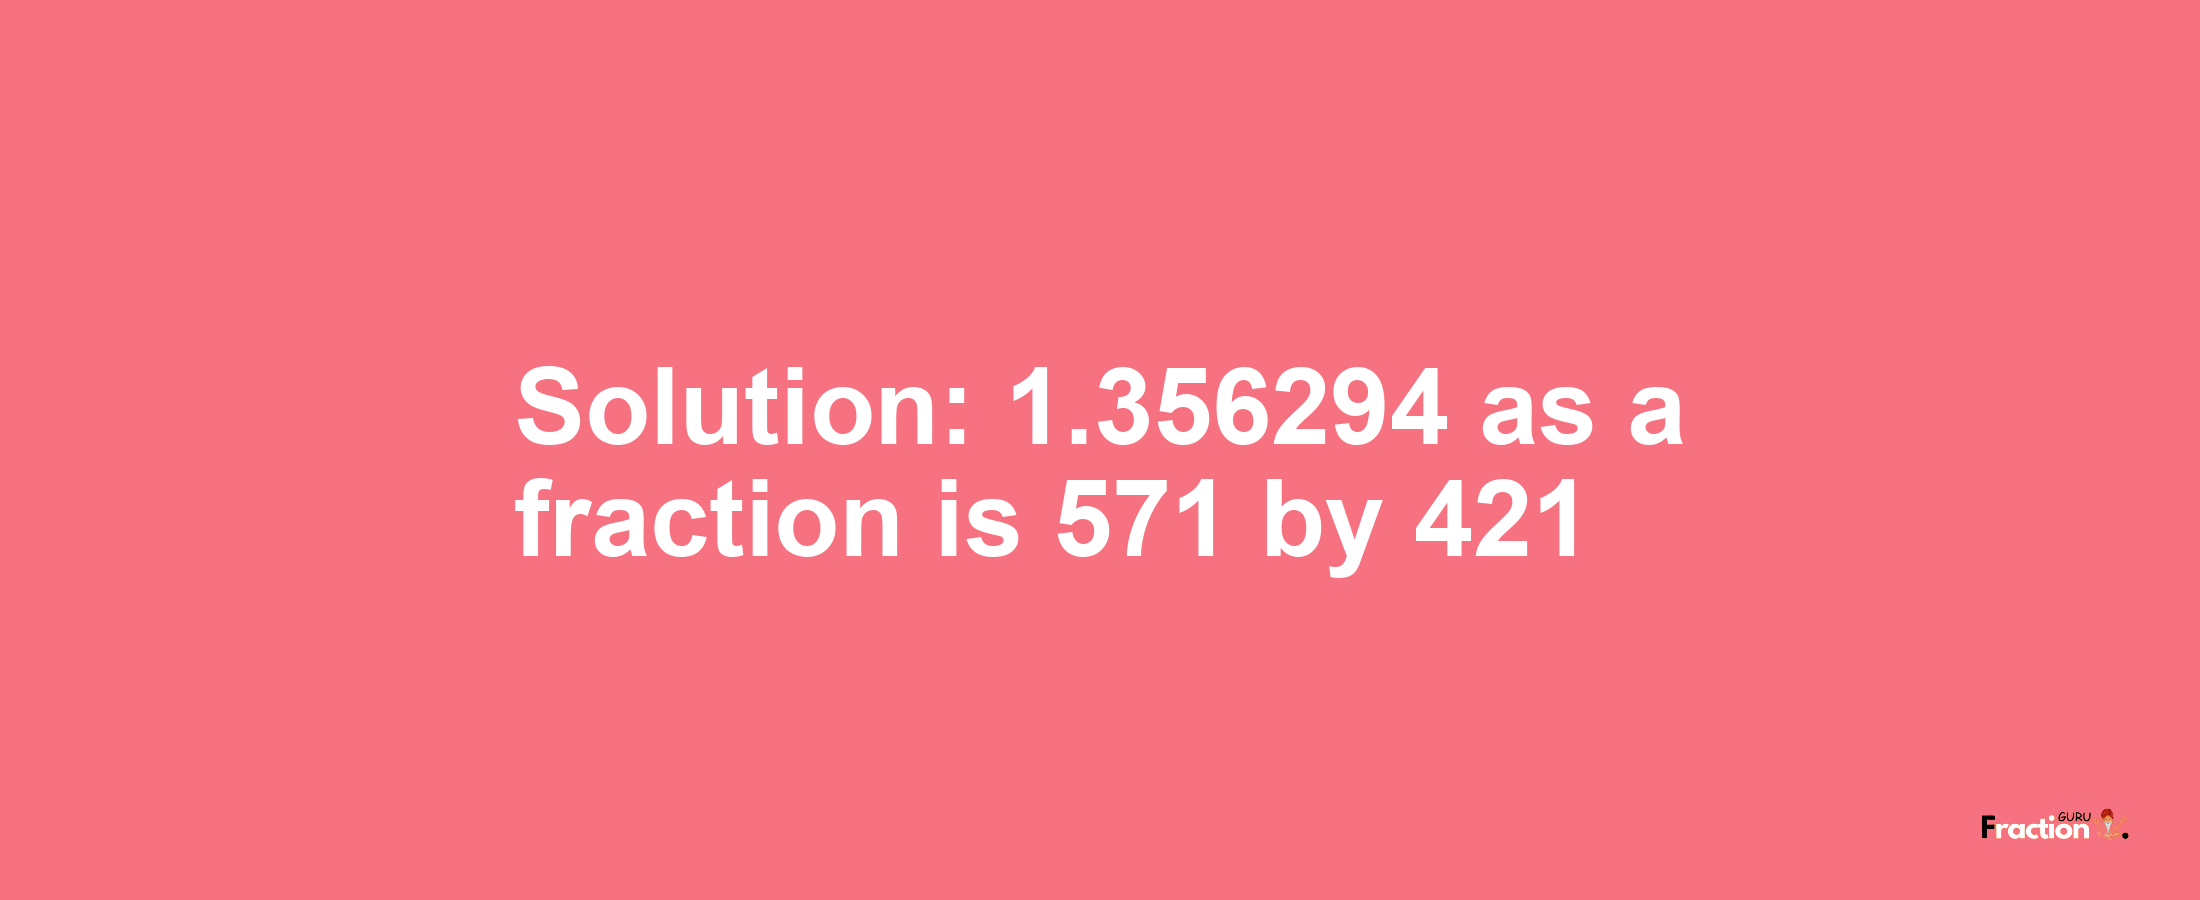 Solution:1.356294 as a fraction is 571/421